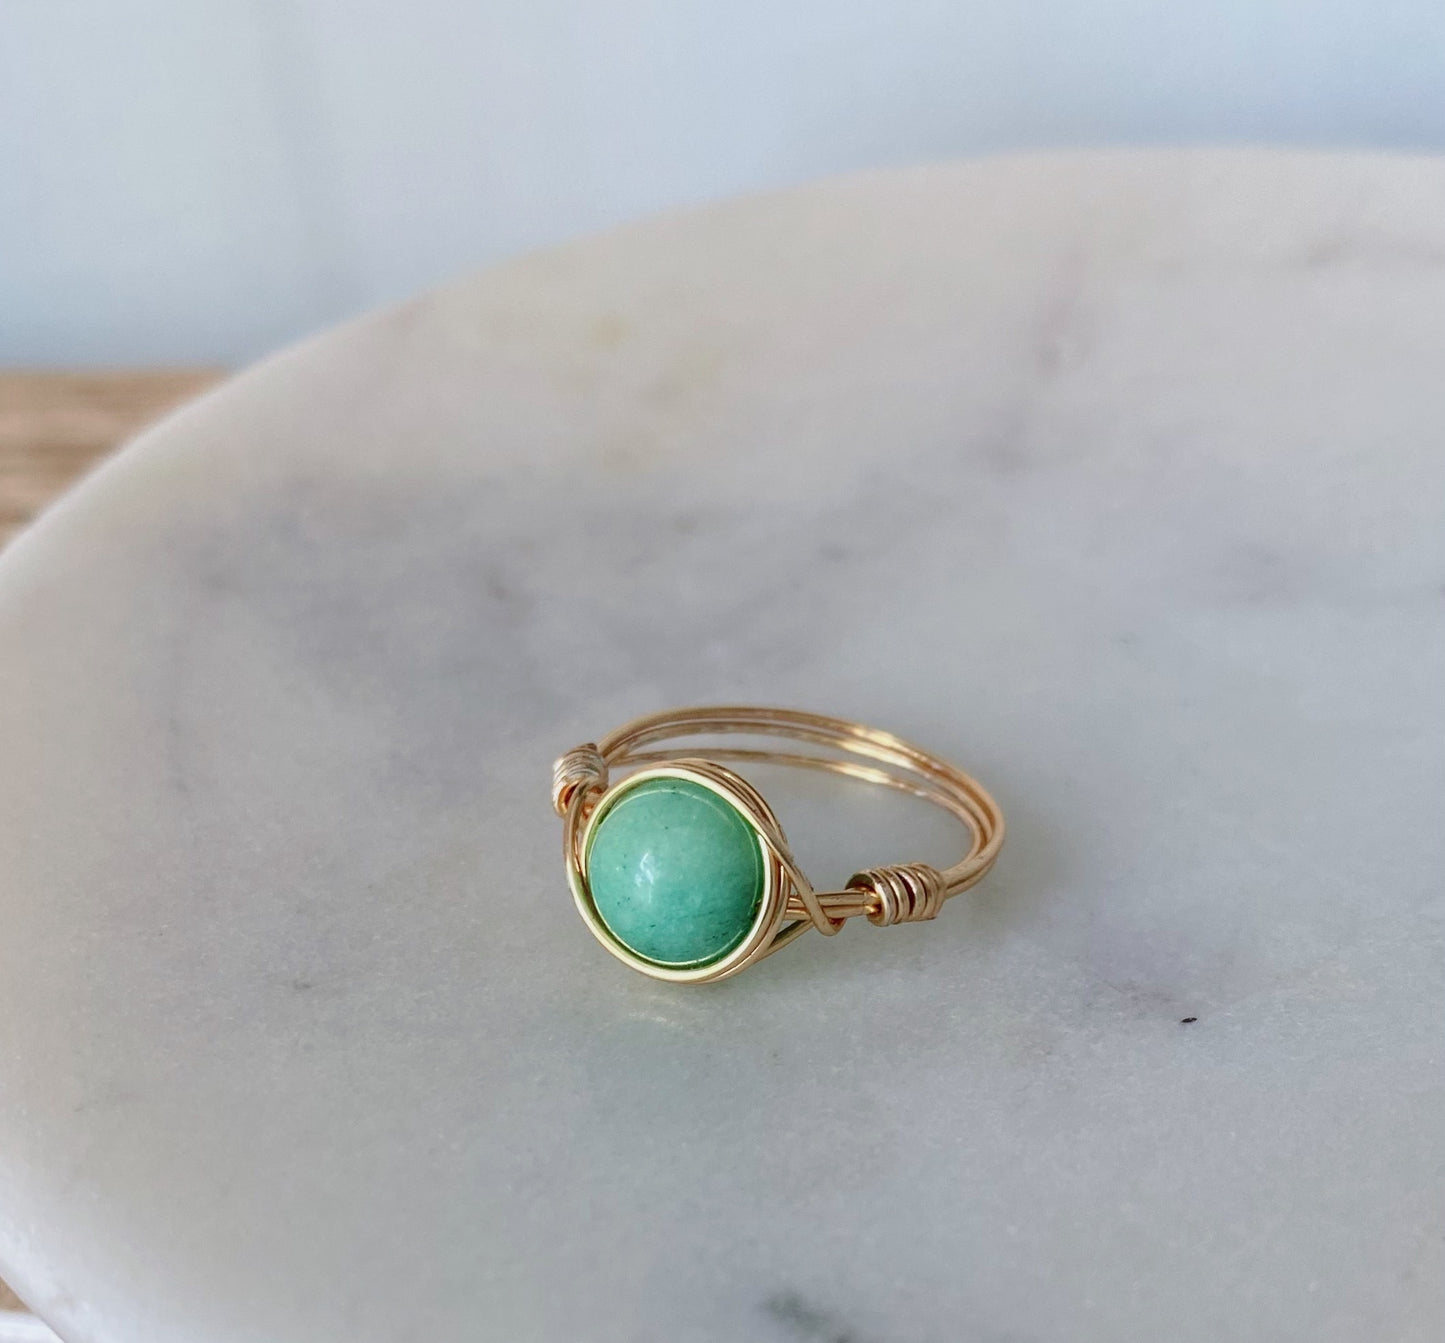 Mint quartzite wire wrapped ring